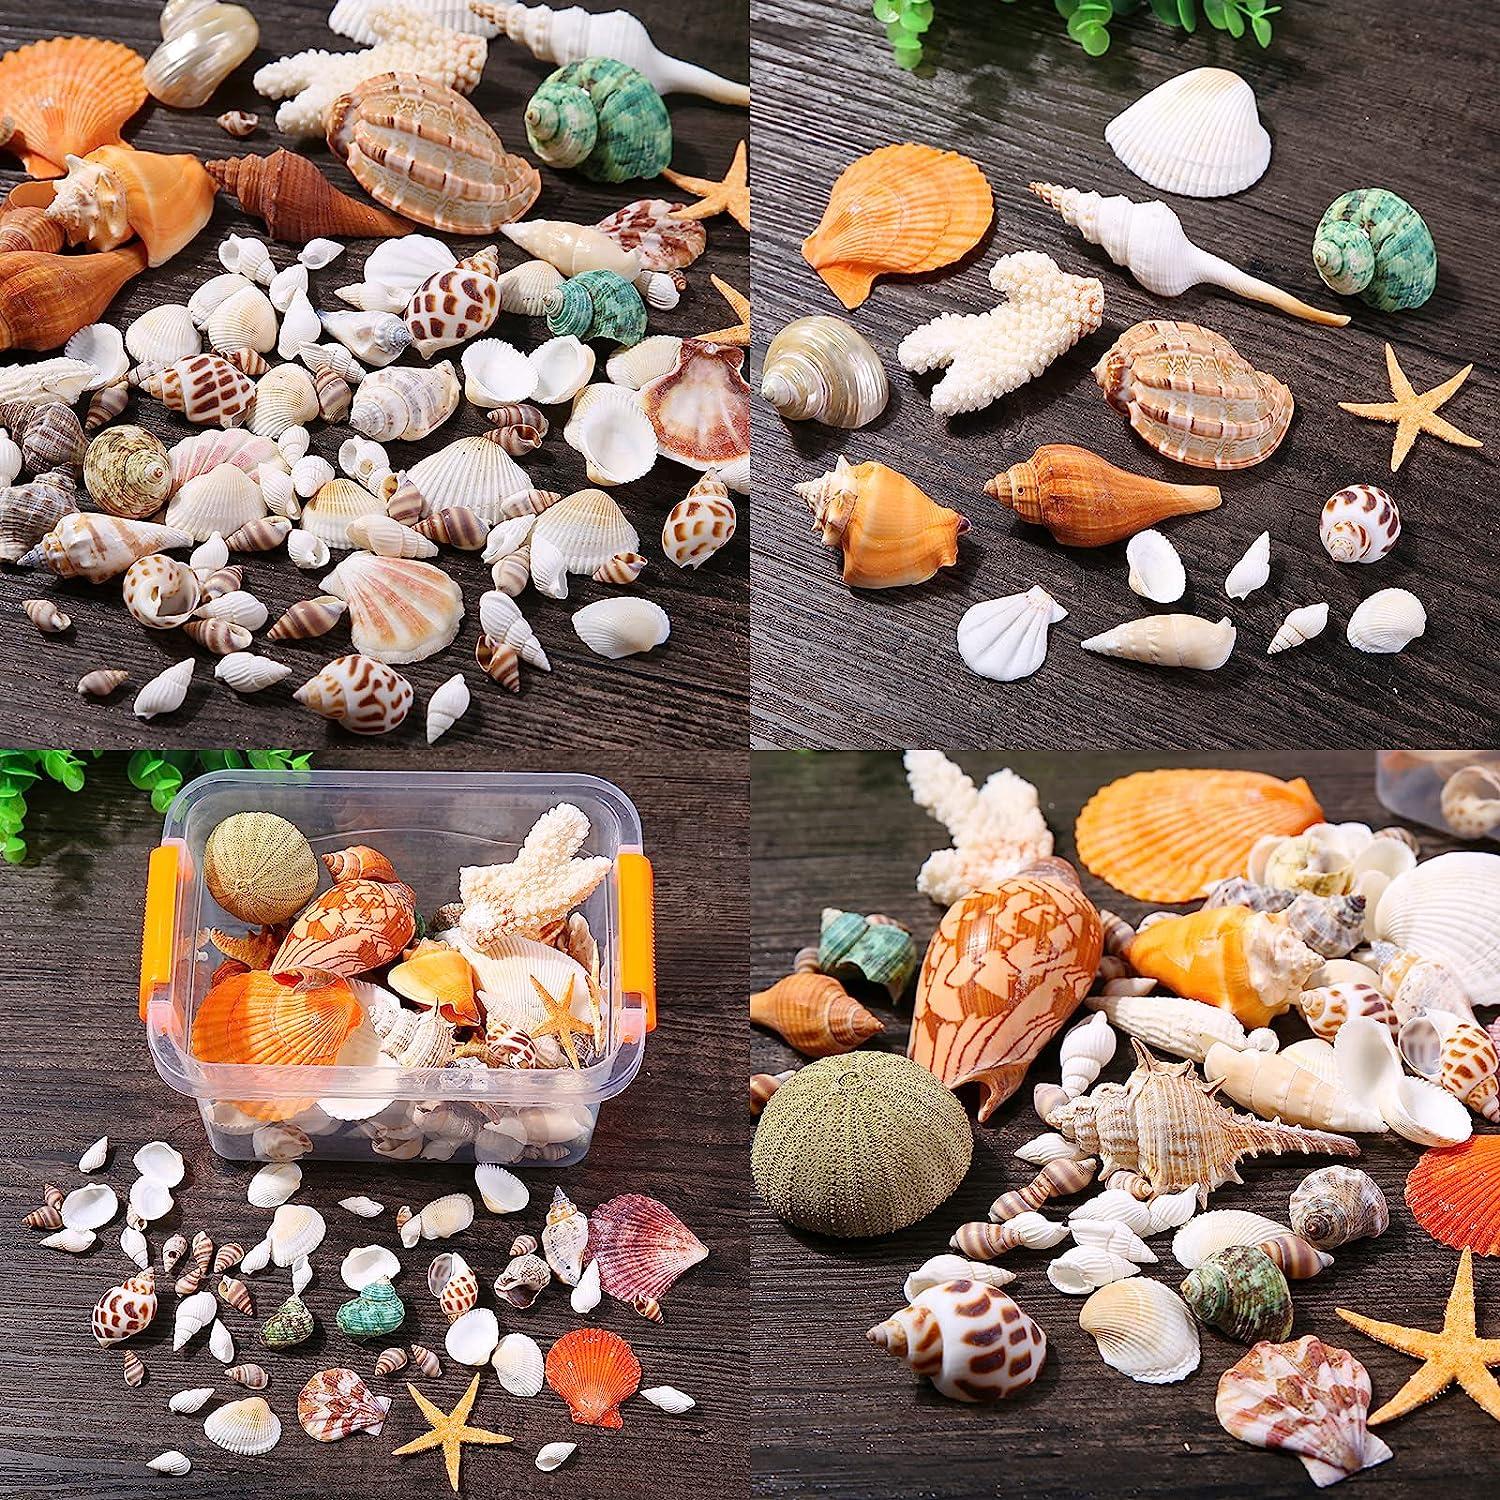 Okllen 2.2 Pounds Mixed Beach Seashells Starfish, Natural Large Conch  Shells Starfish Colorful Sea Shells for Beach Theme Party, Fish Tank, DIY  Crafts, Wedding Decor, Home Decorations